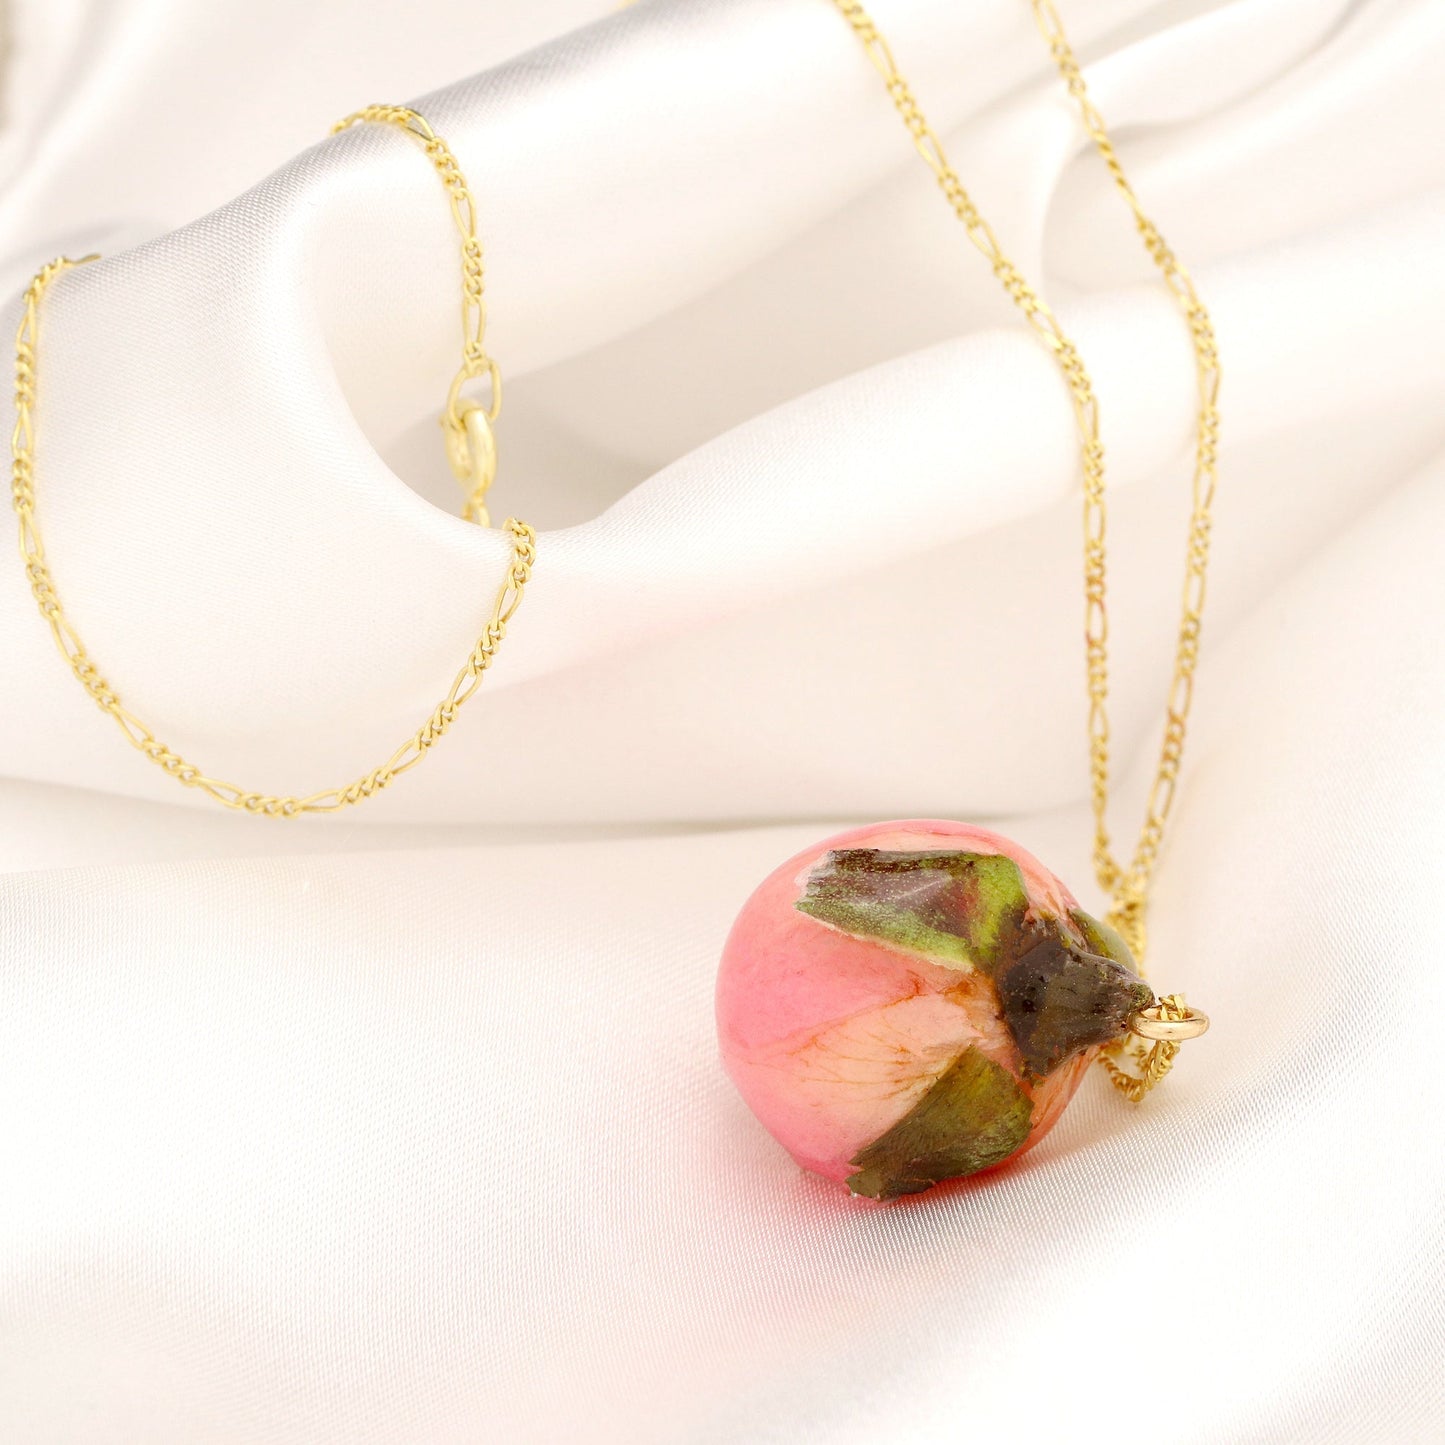 Real Rose Necklace - 925 Sterling Gold Plated Chain Poured with Resin - K925-58